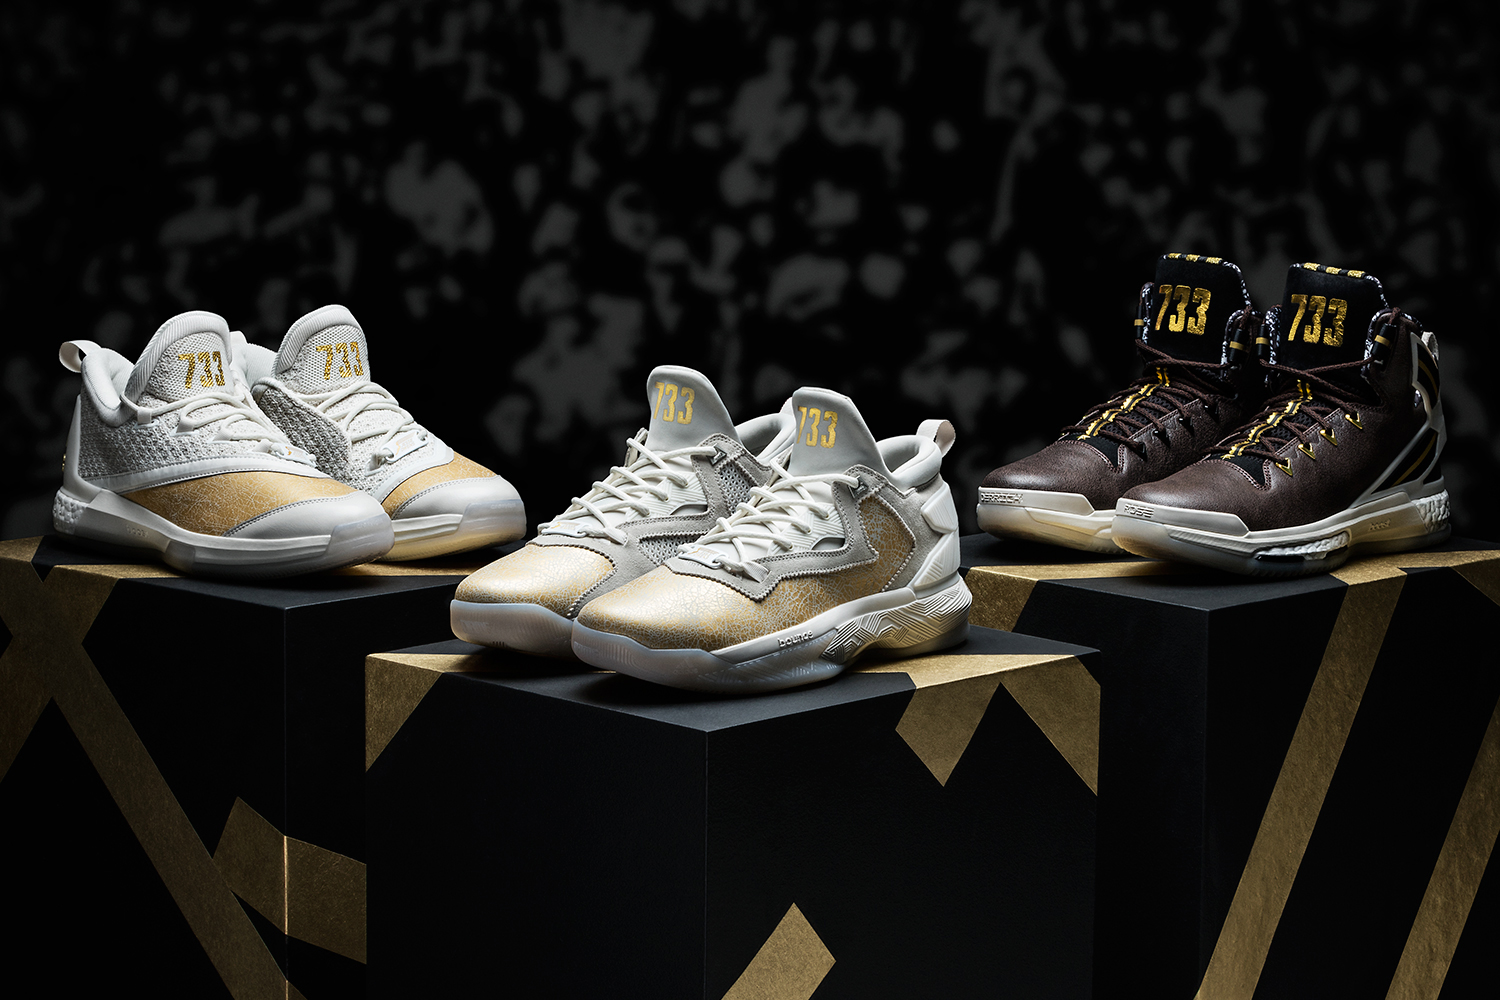 adidas Jesse Owens Black History Month Collection